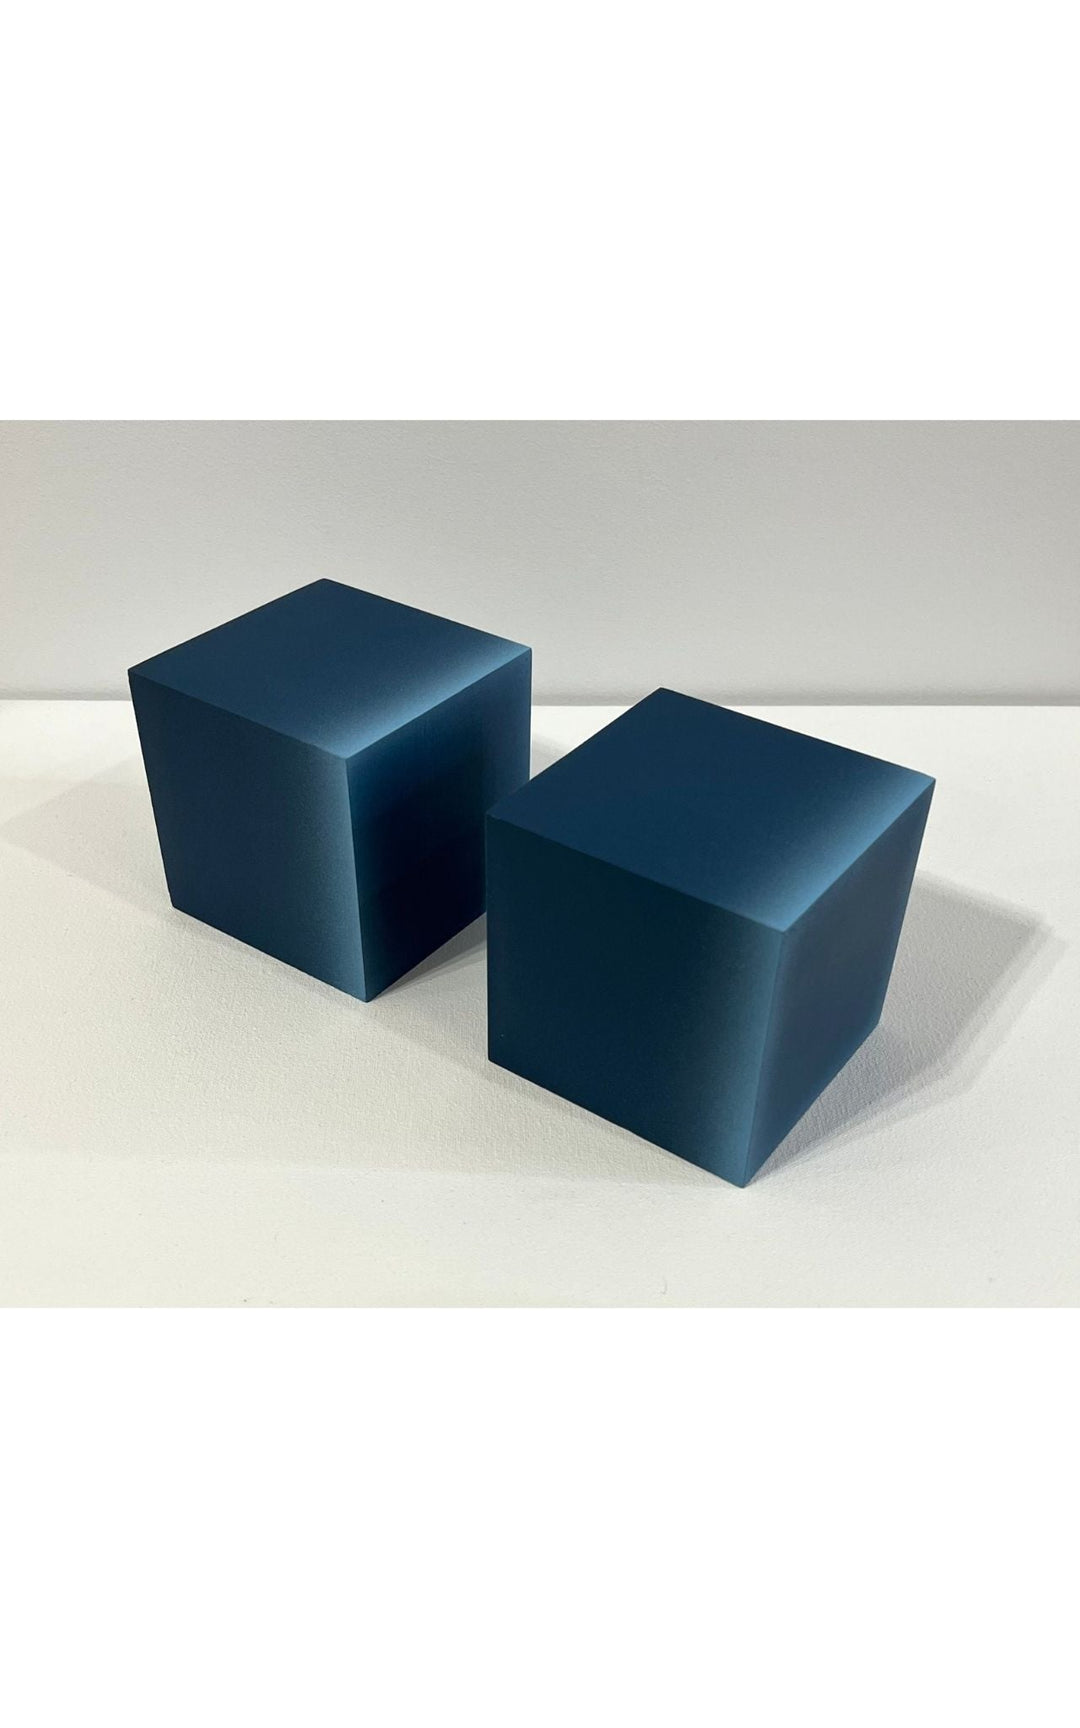 Minimalist cubes with gradient hues. Configurations vary.